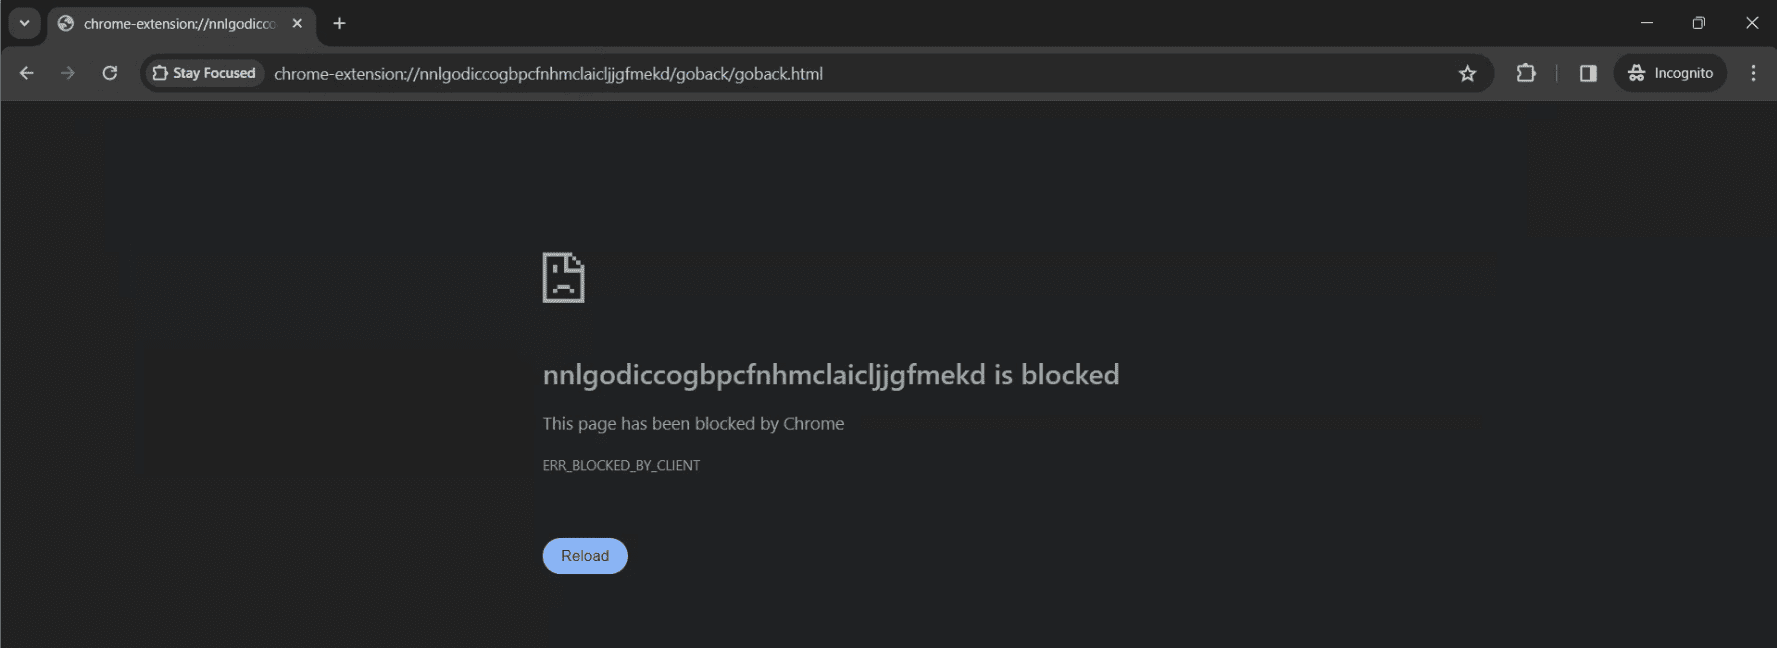 website blocked in incognito mode